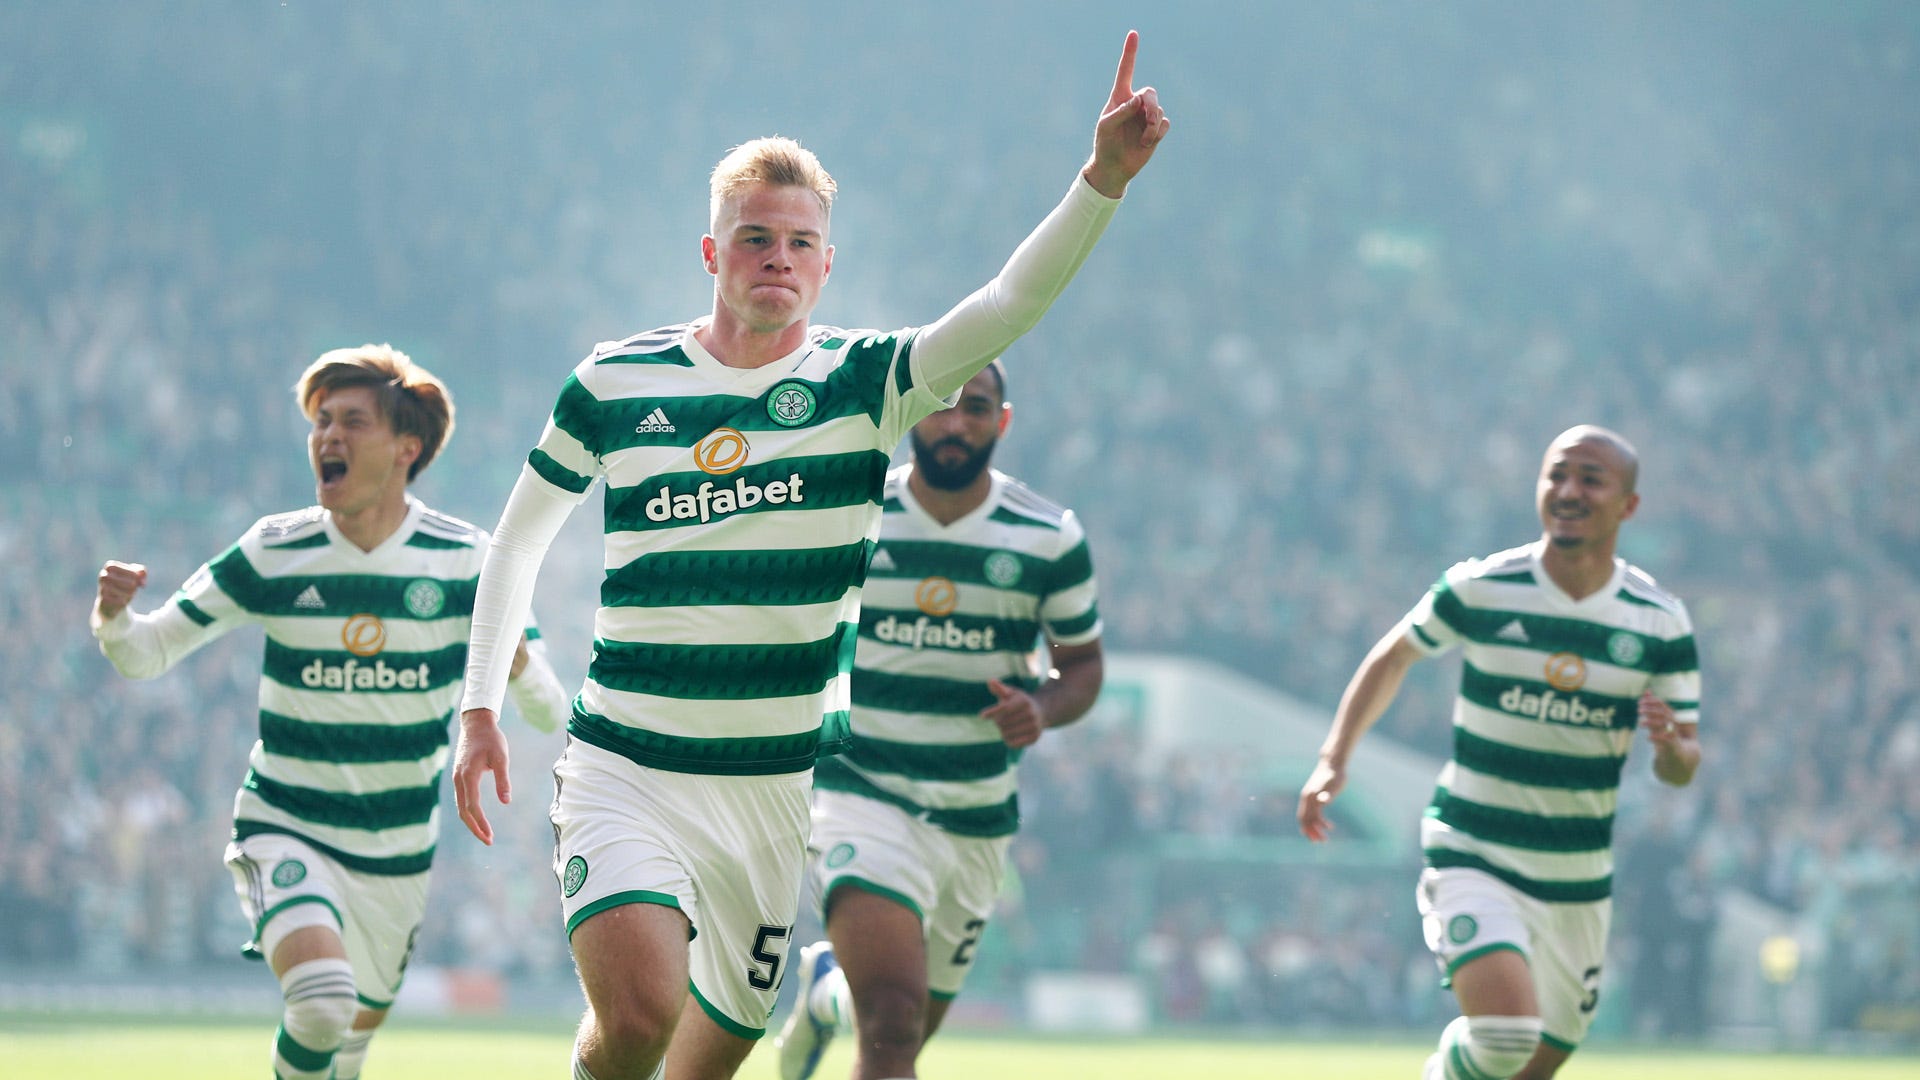 Ross County vs Celtic Live stream, TV channel, kick-off time and how to watch Goal US